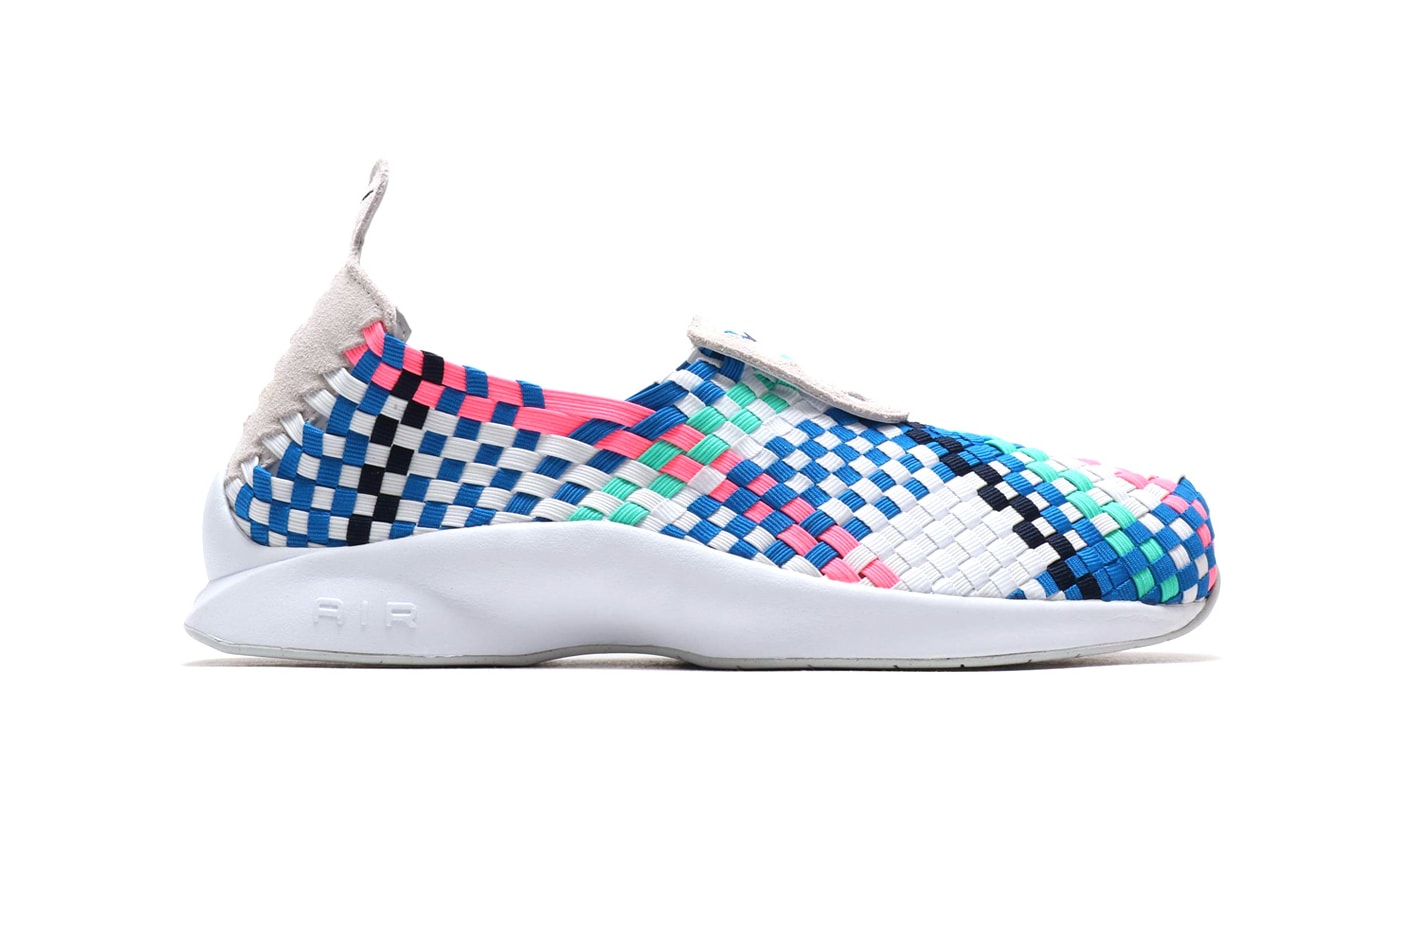 Nike Air Woven Spring Summer 2018 Drops may release date info drop sneakers shoes footwear